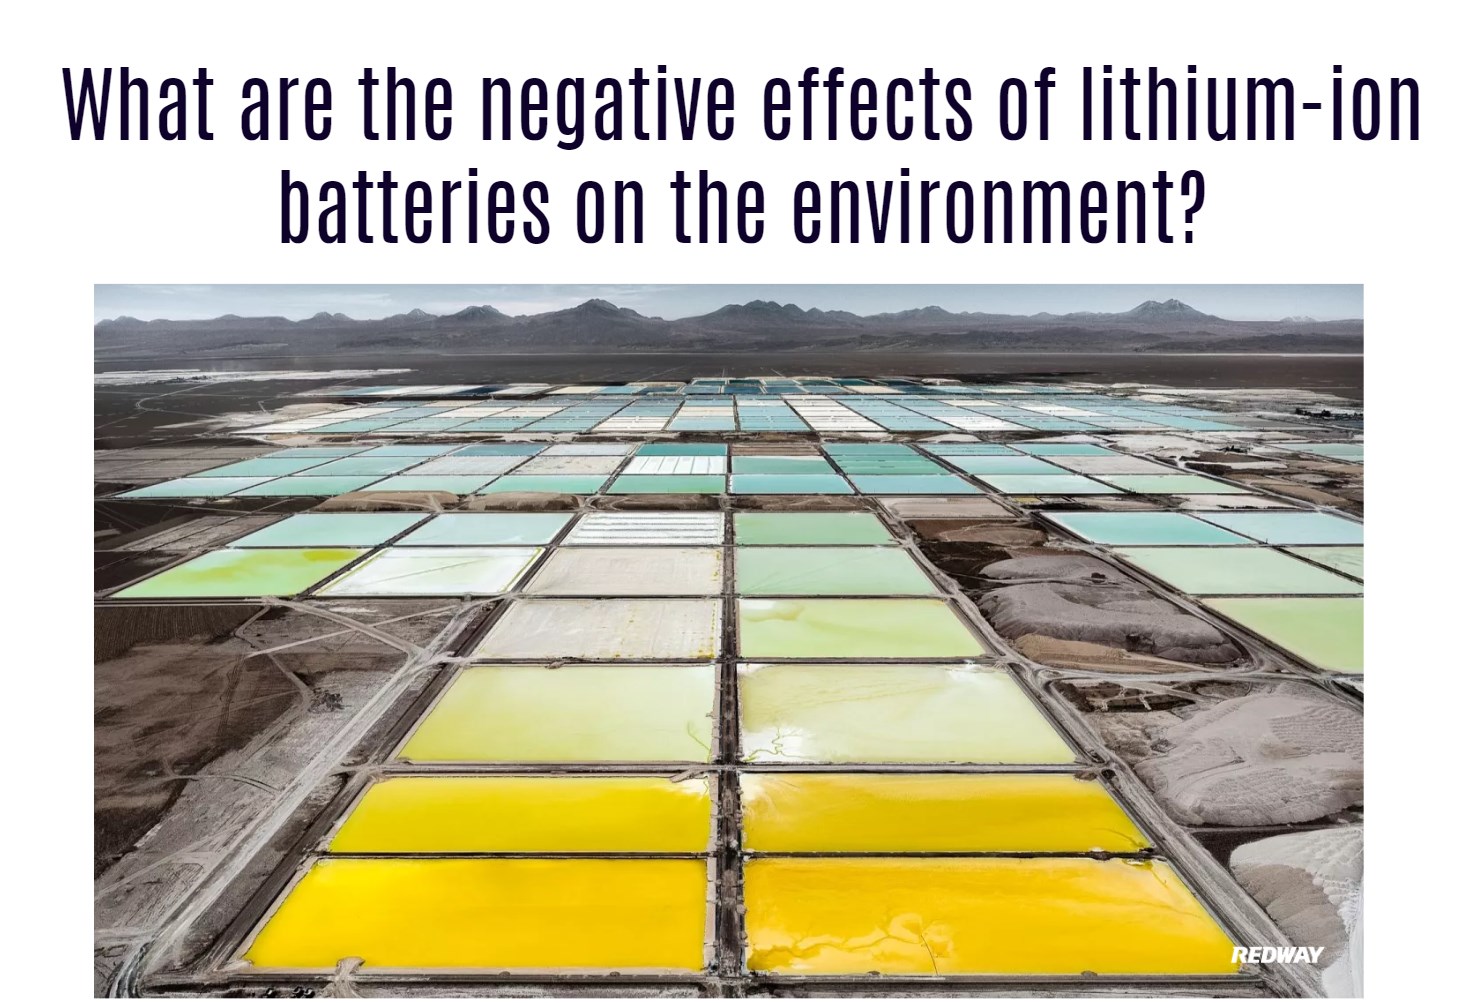 What are the negative effects of lithium-ion batteries on the environment?